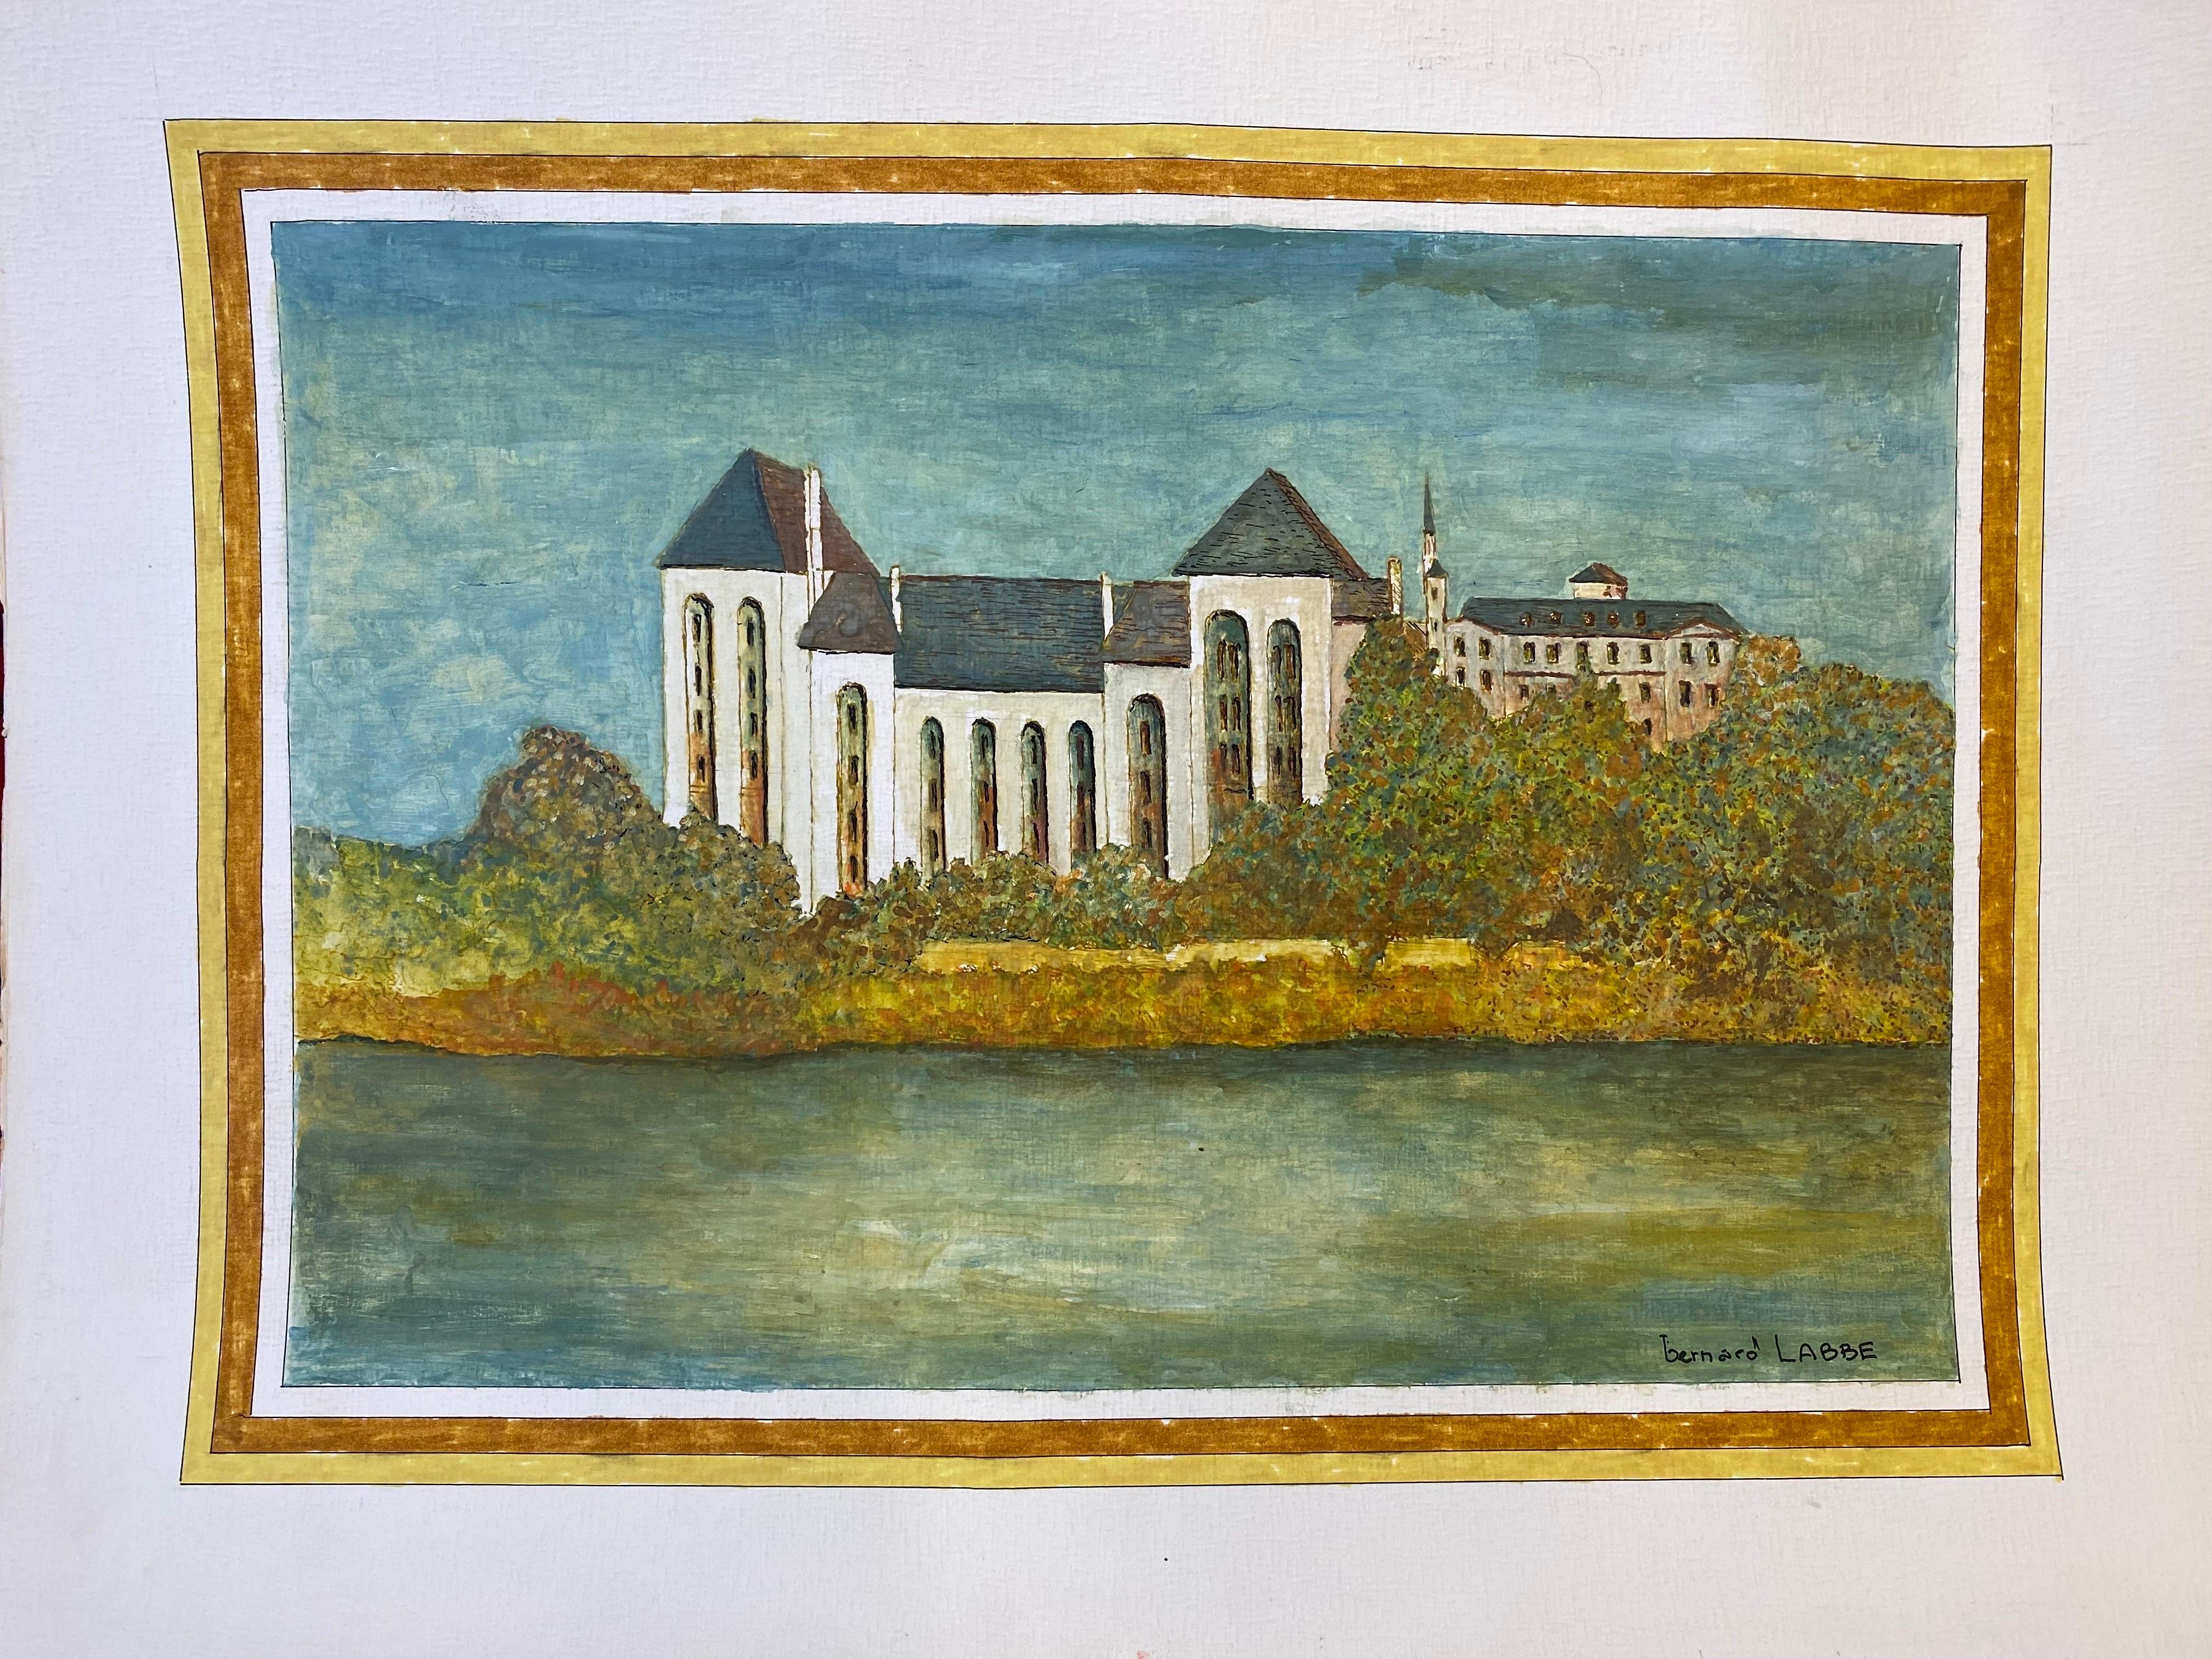 1950's Modernist Signed Painting  - Large French Building Over River - Art by Bernard Labbe